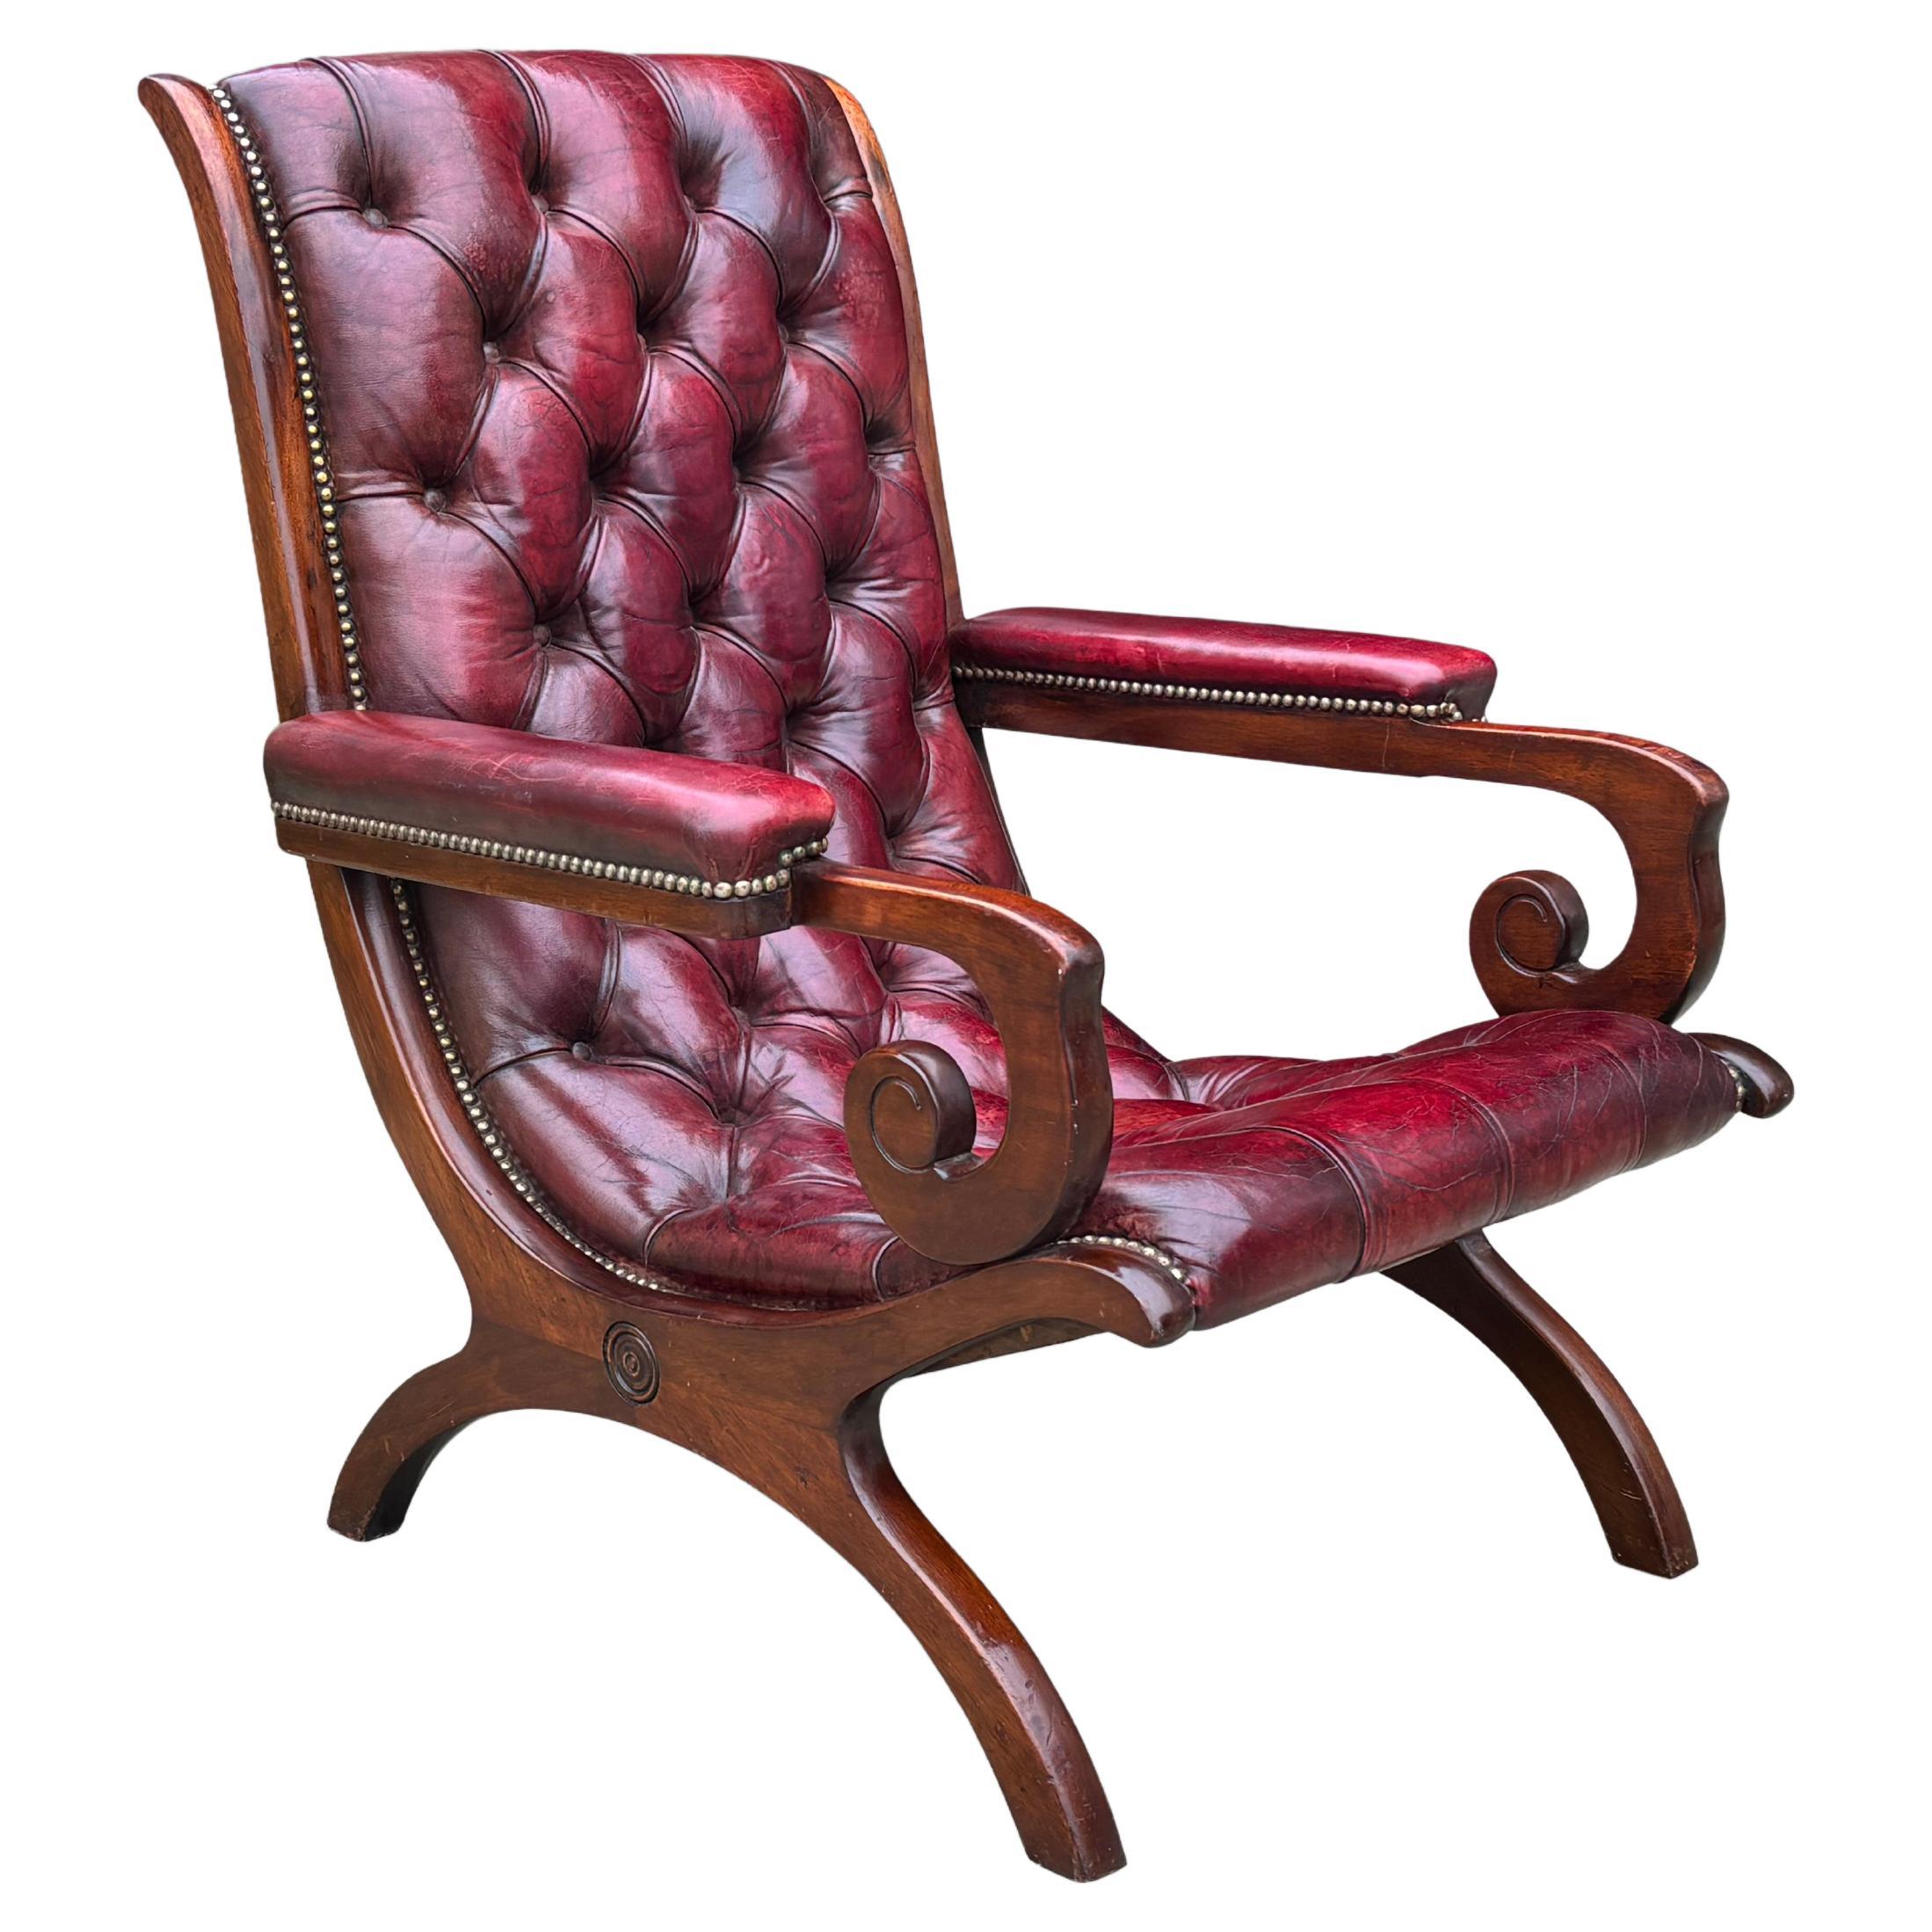 Quality Burgundy Red Leather Chesterfield Slipper Armchair For Sale